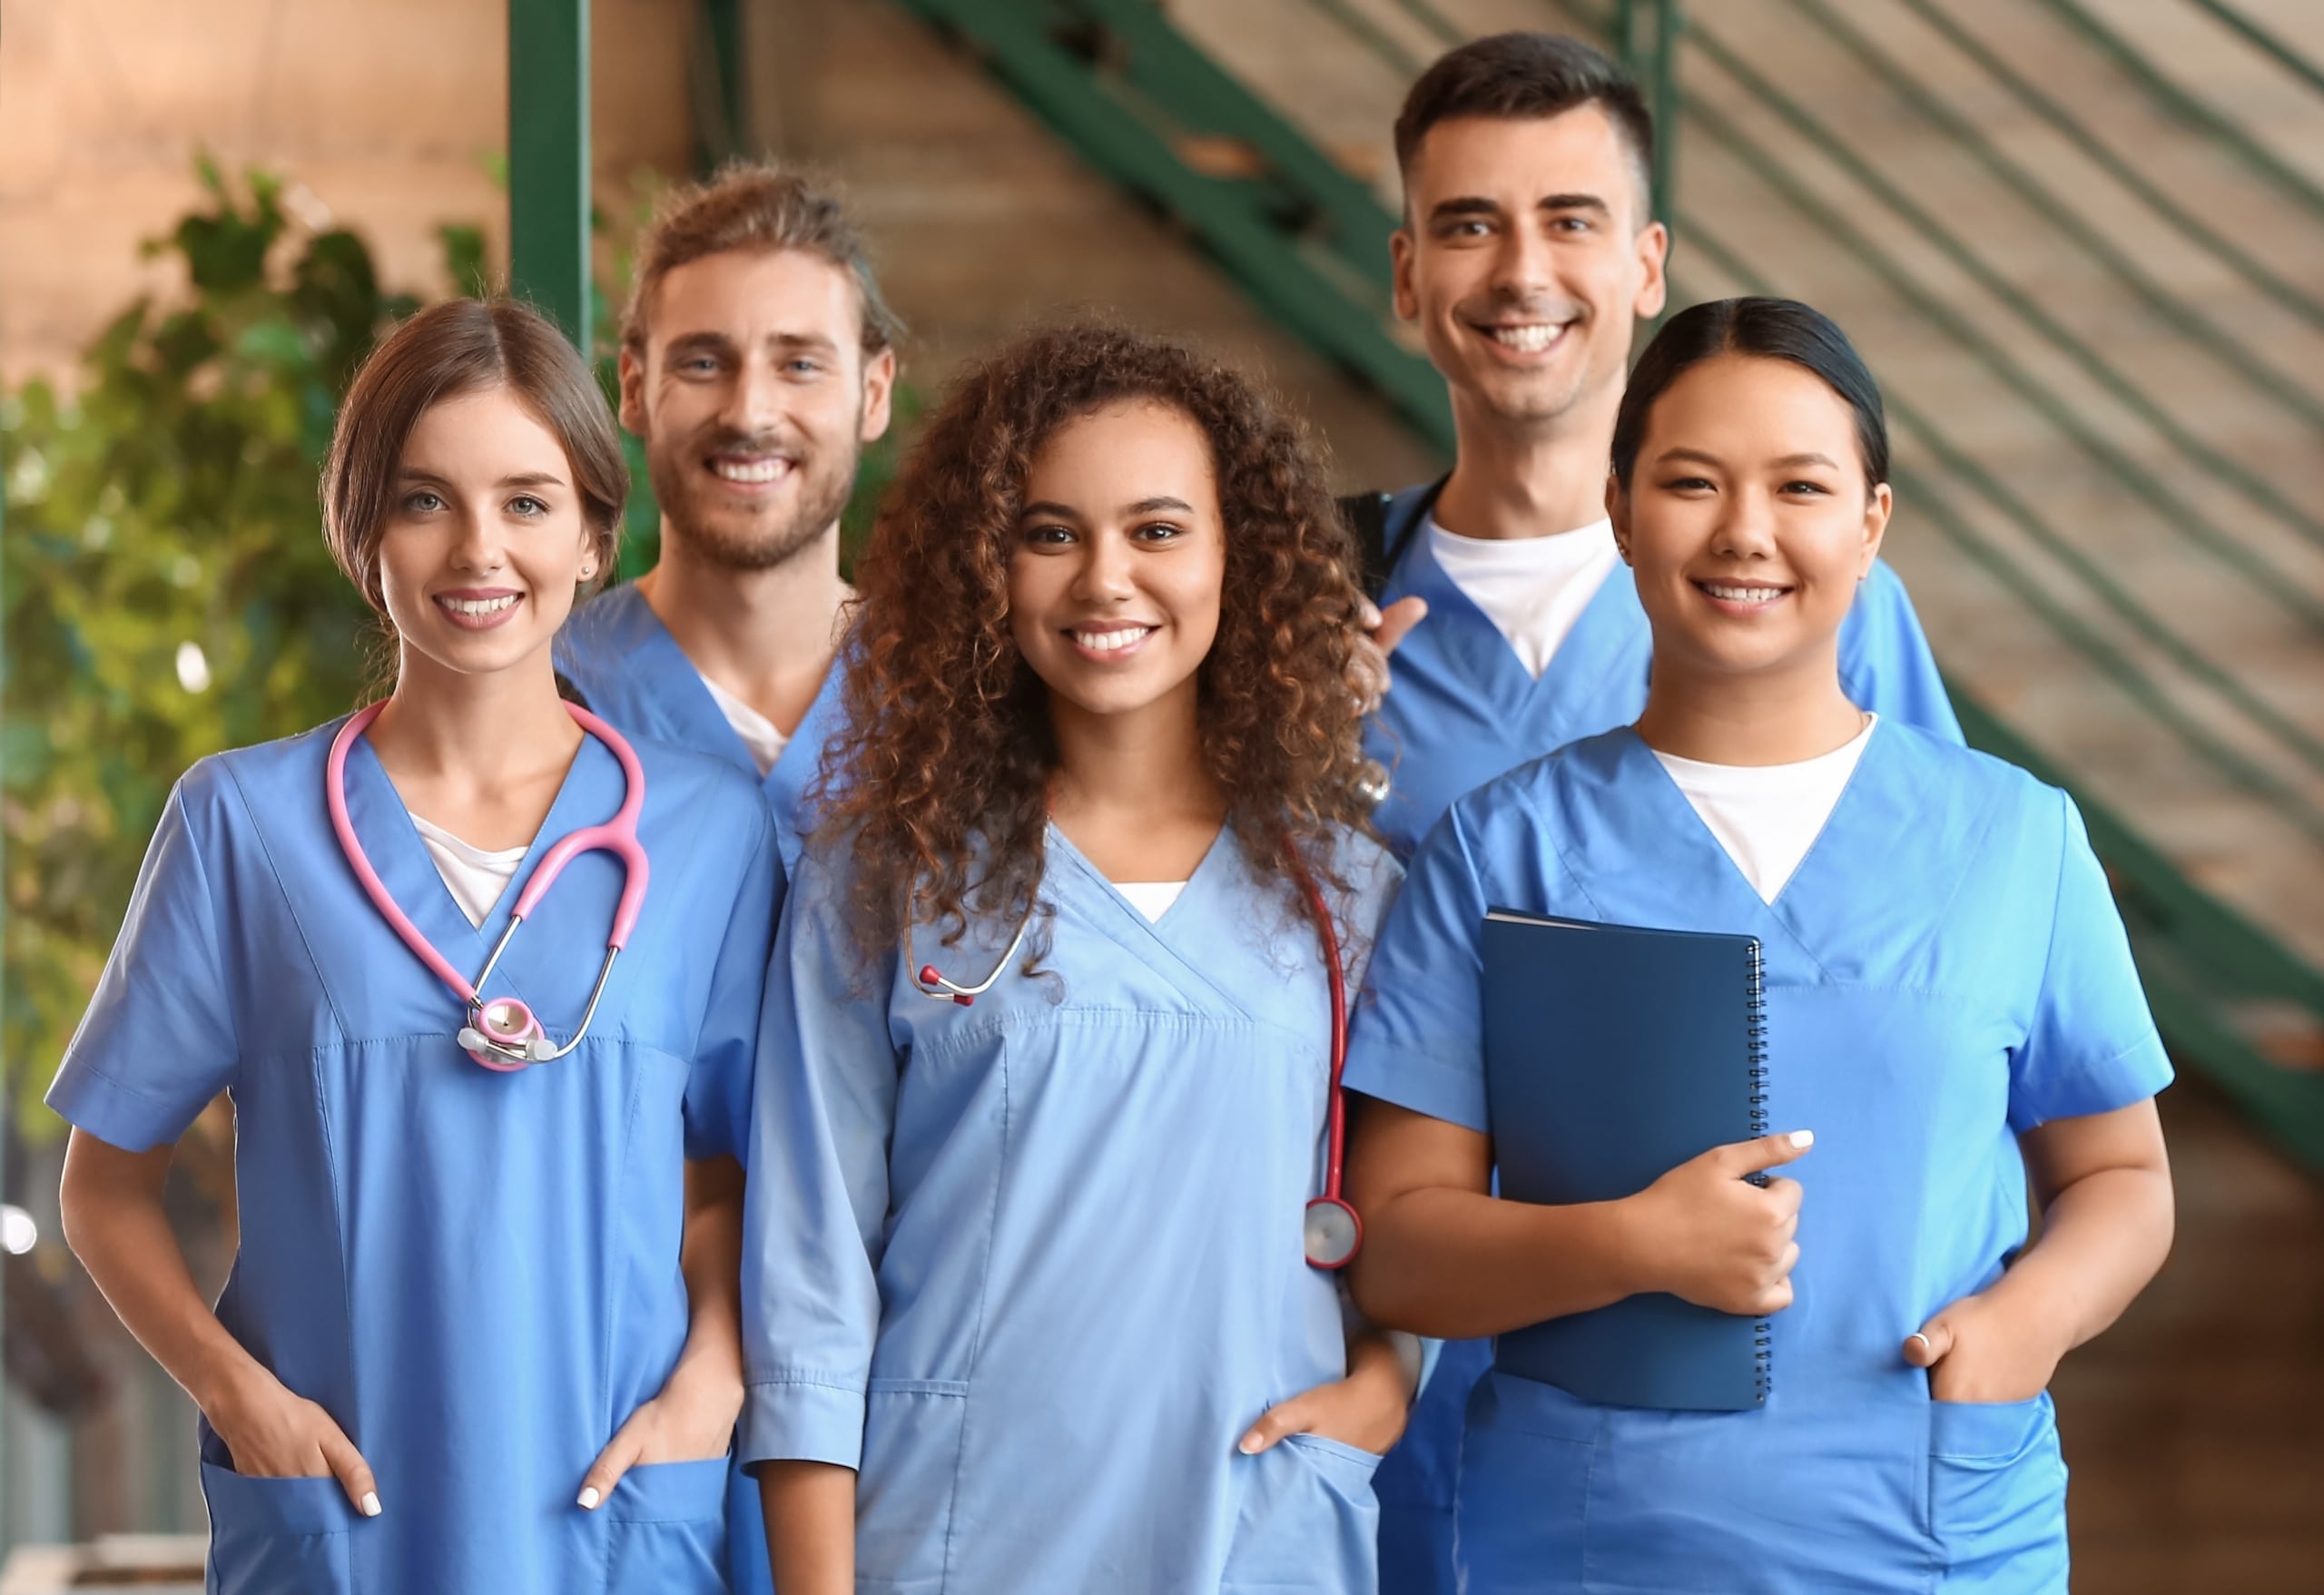 Group of smiling medical professionals in front of an outdoor stairwell